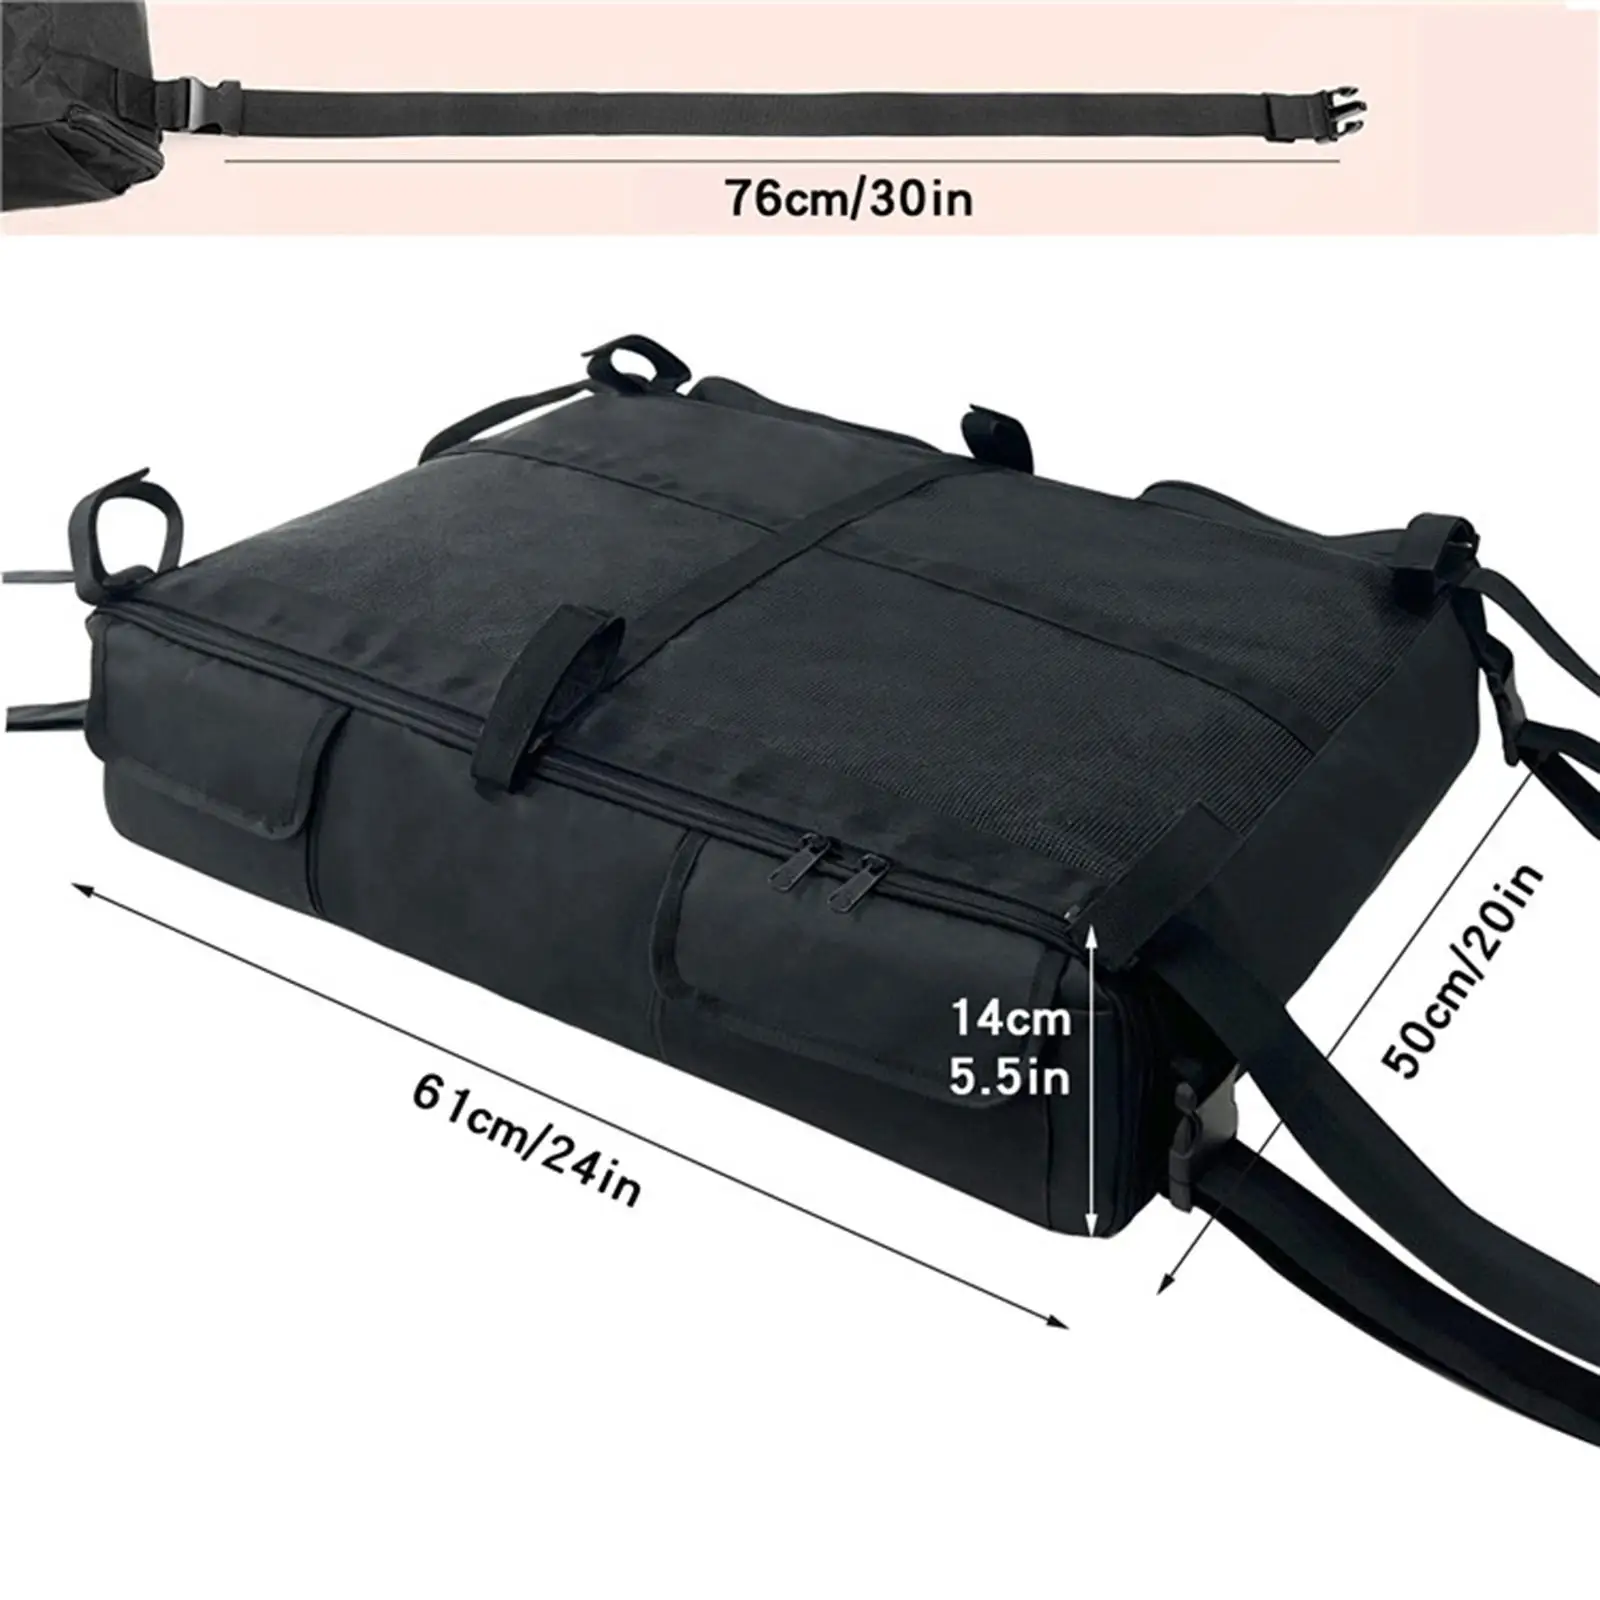 T Top Bag Replacement 600D Oxford Fabric Waterproof Durable T Bag T Top Bimini Storage Pack for Outdoor Camping T Top Boats